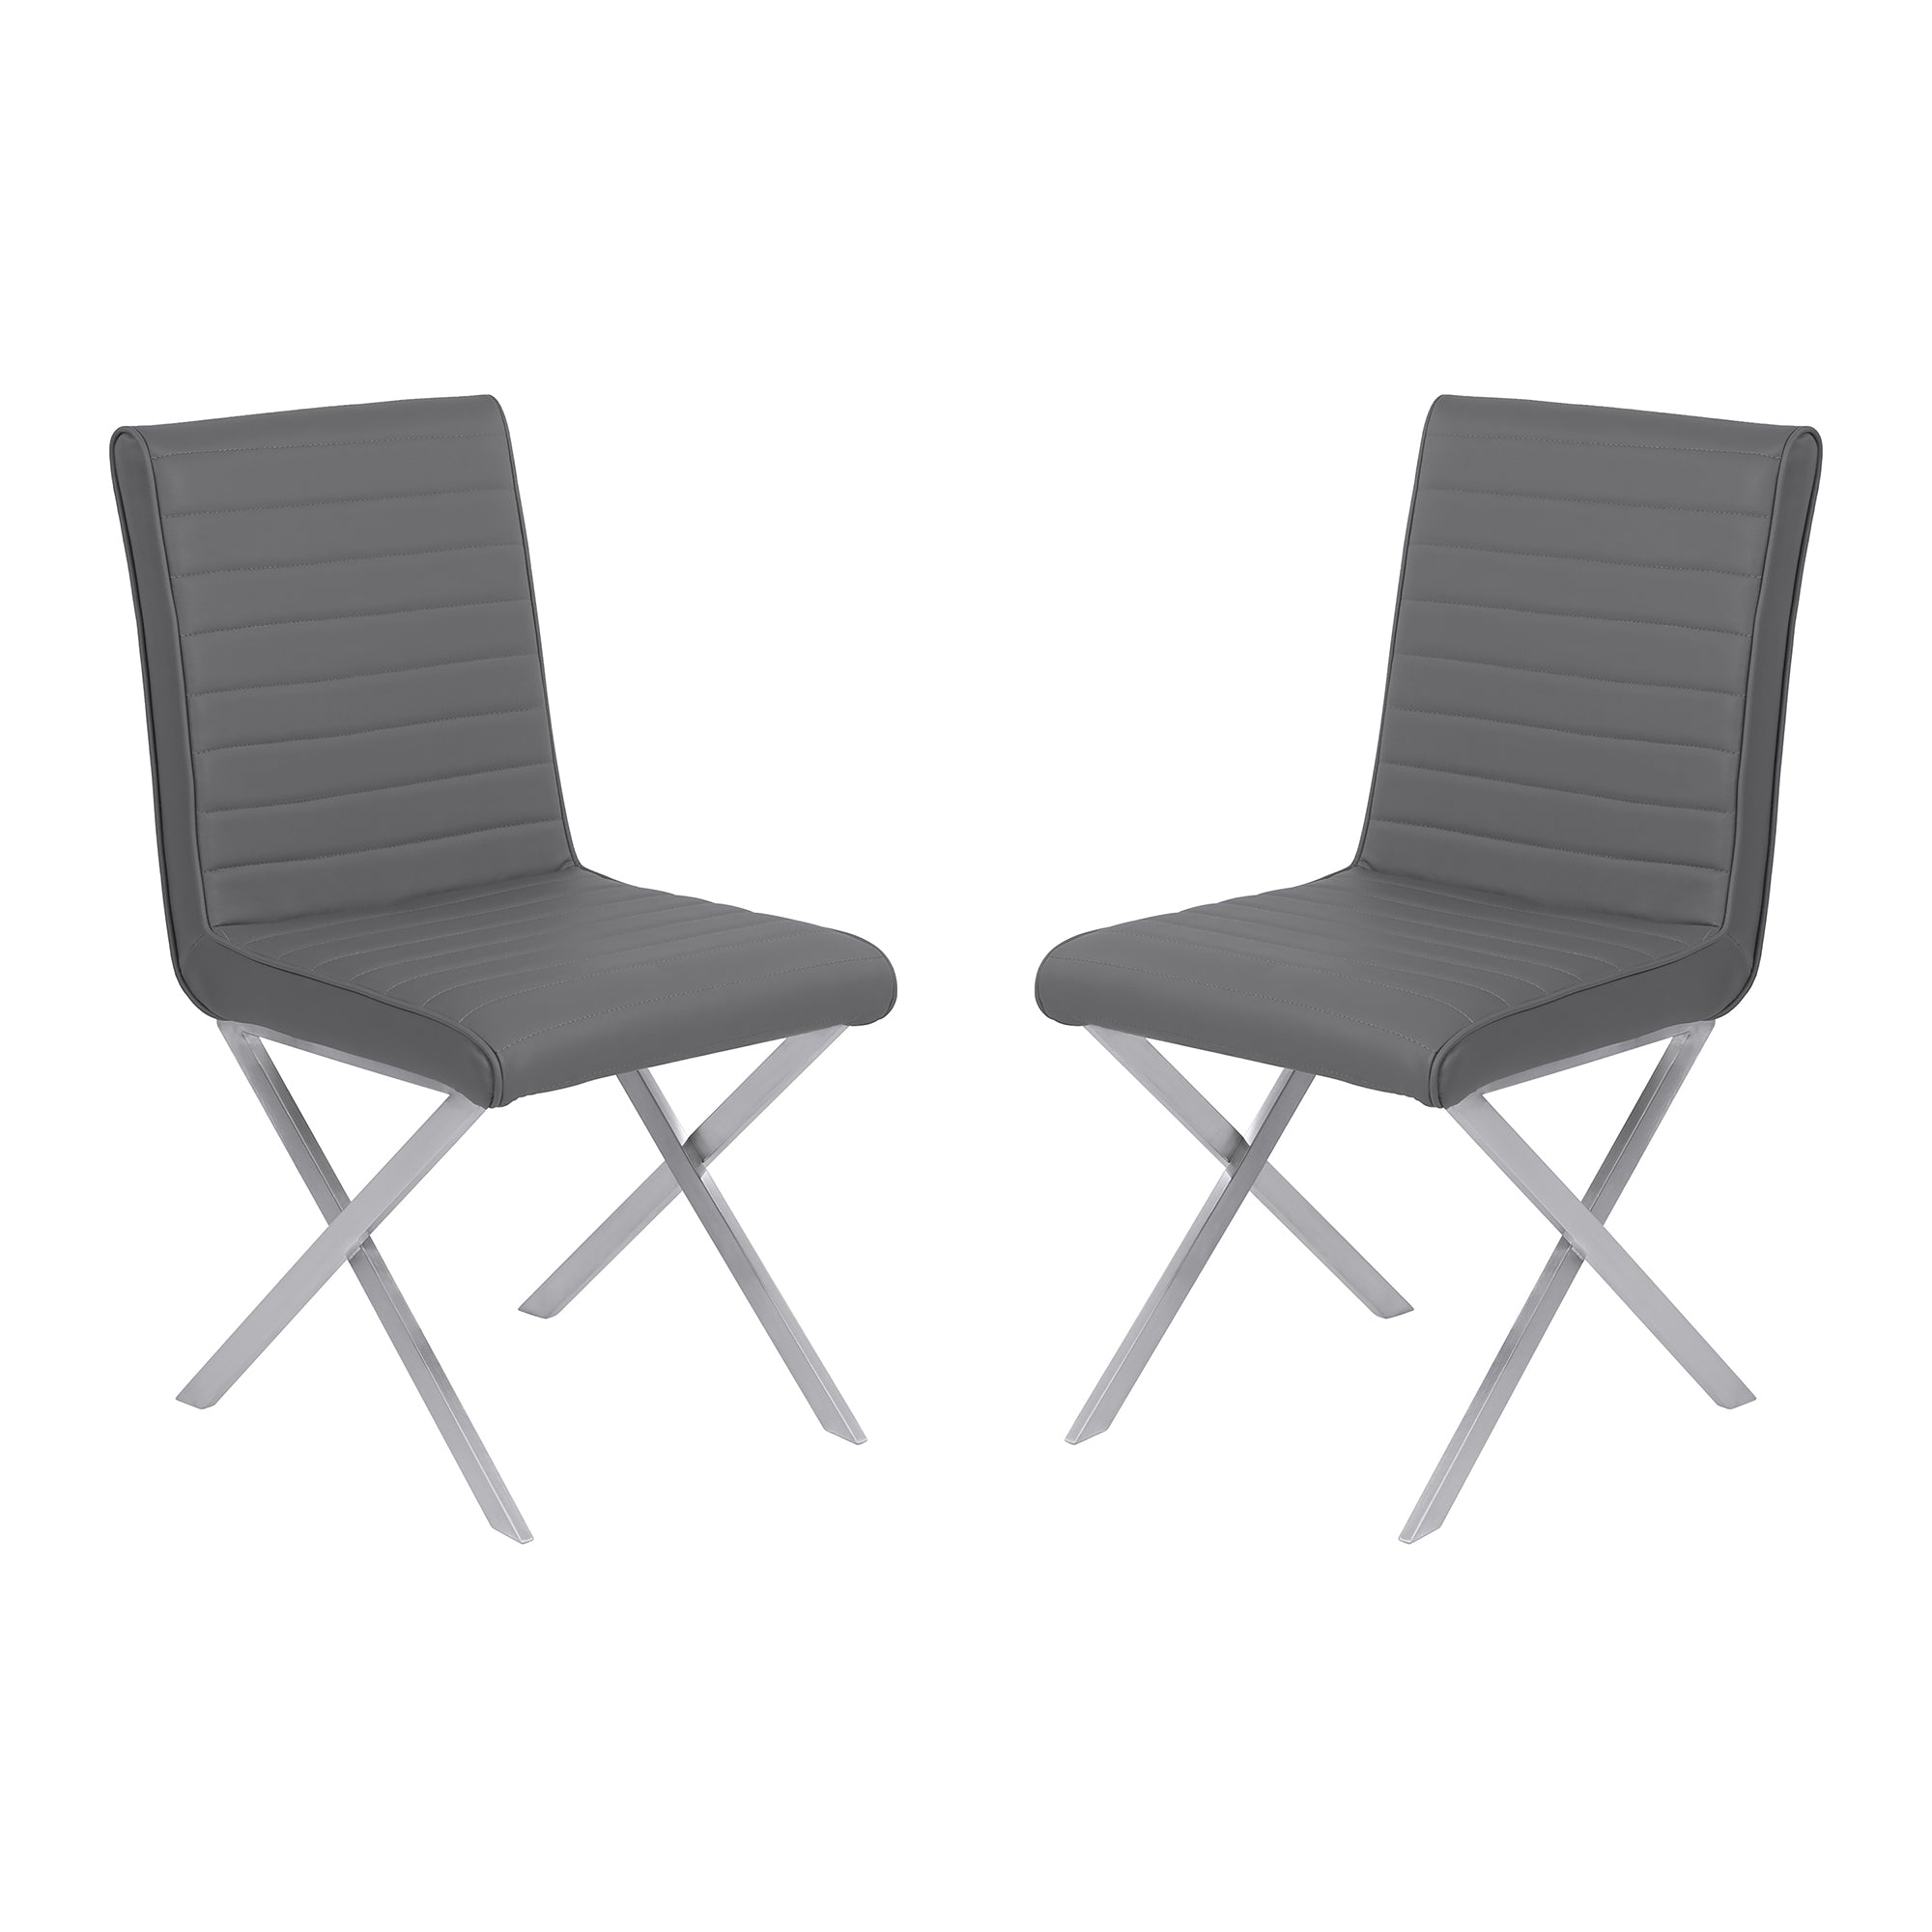 Armen Living Lctesigrbs Tempe Contemporary Dining Chair In Gray Faux Leather With Brushed Stainless Steel Finish - Set Of 2